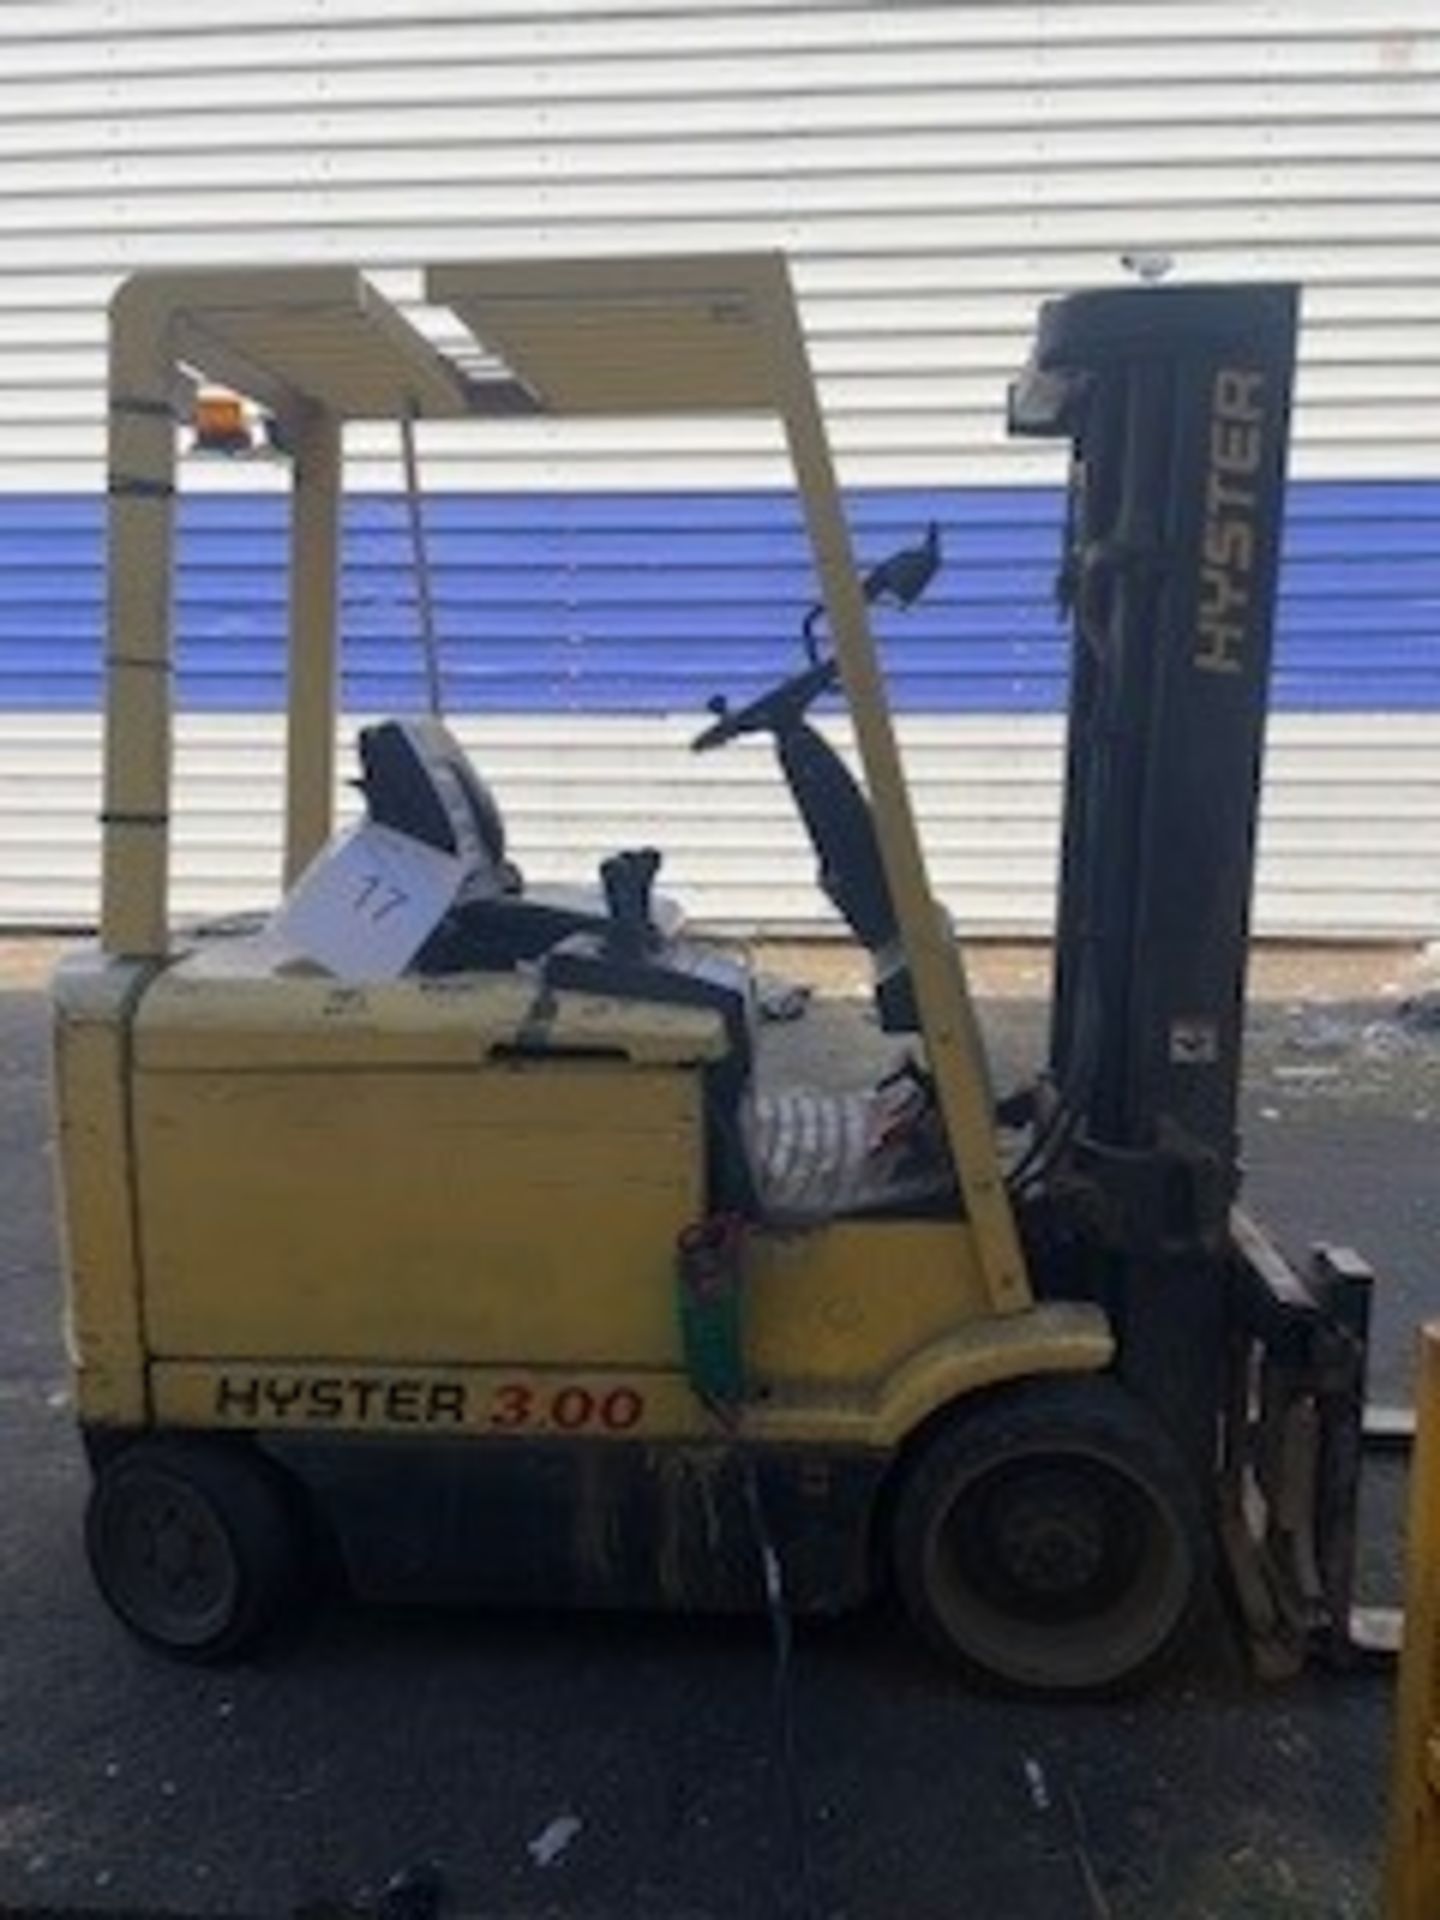 Hyster Electric Forklift Truck Model E3.00XM-847 - Image 2 of 4